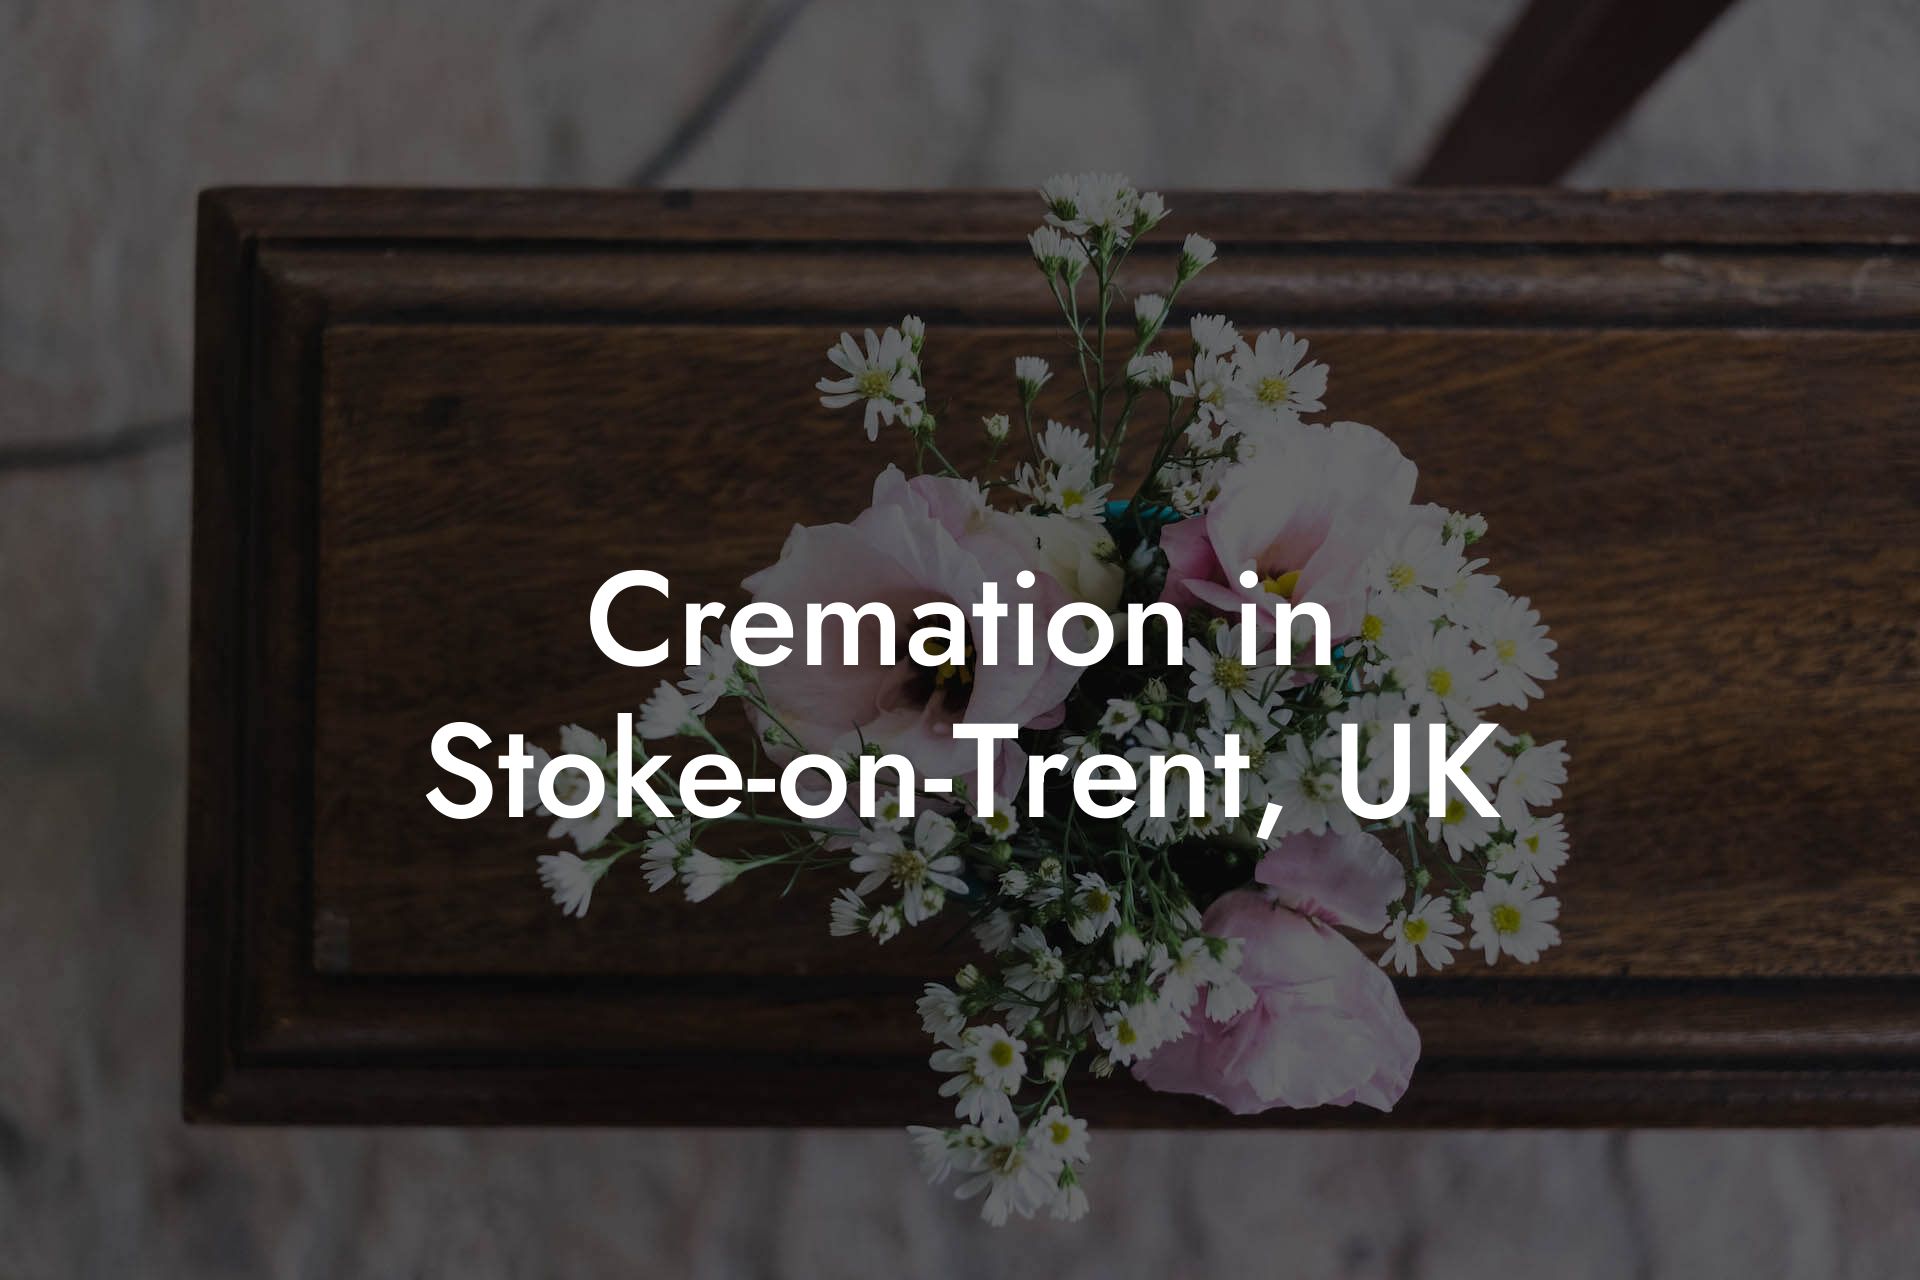 Cremation in Stoke-on-Trent, UK